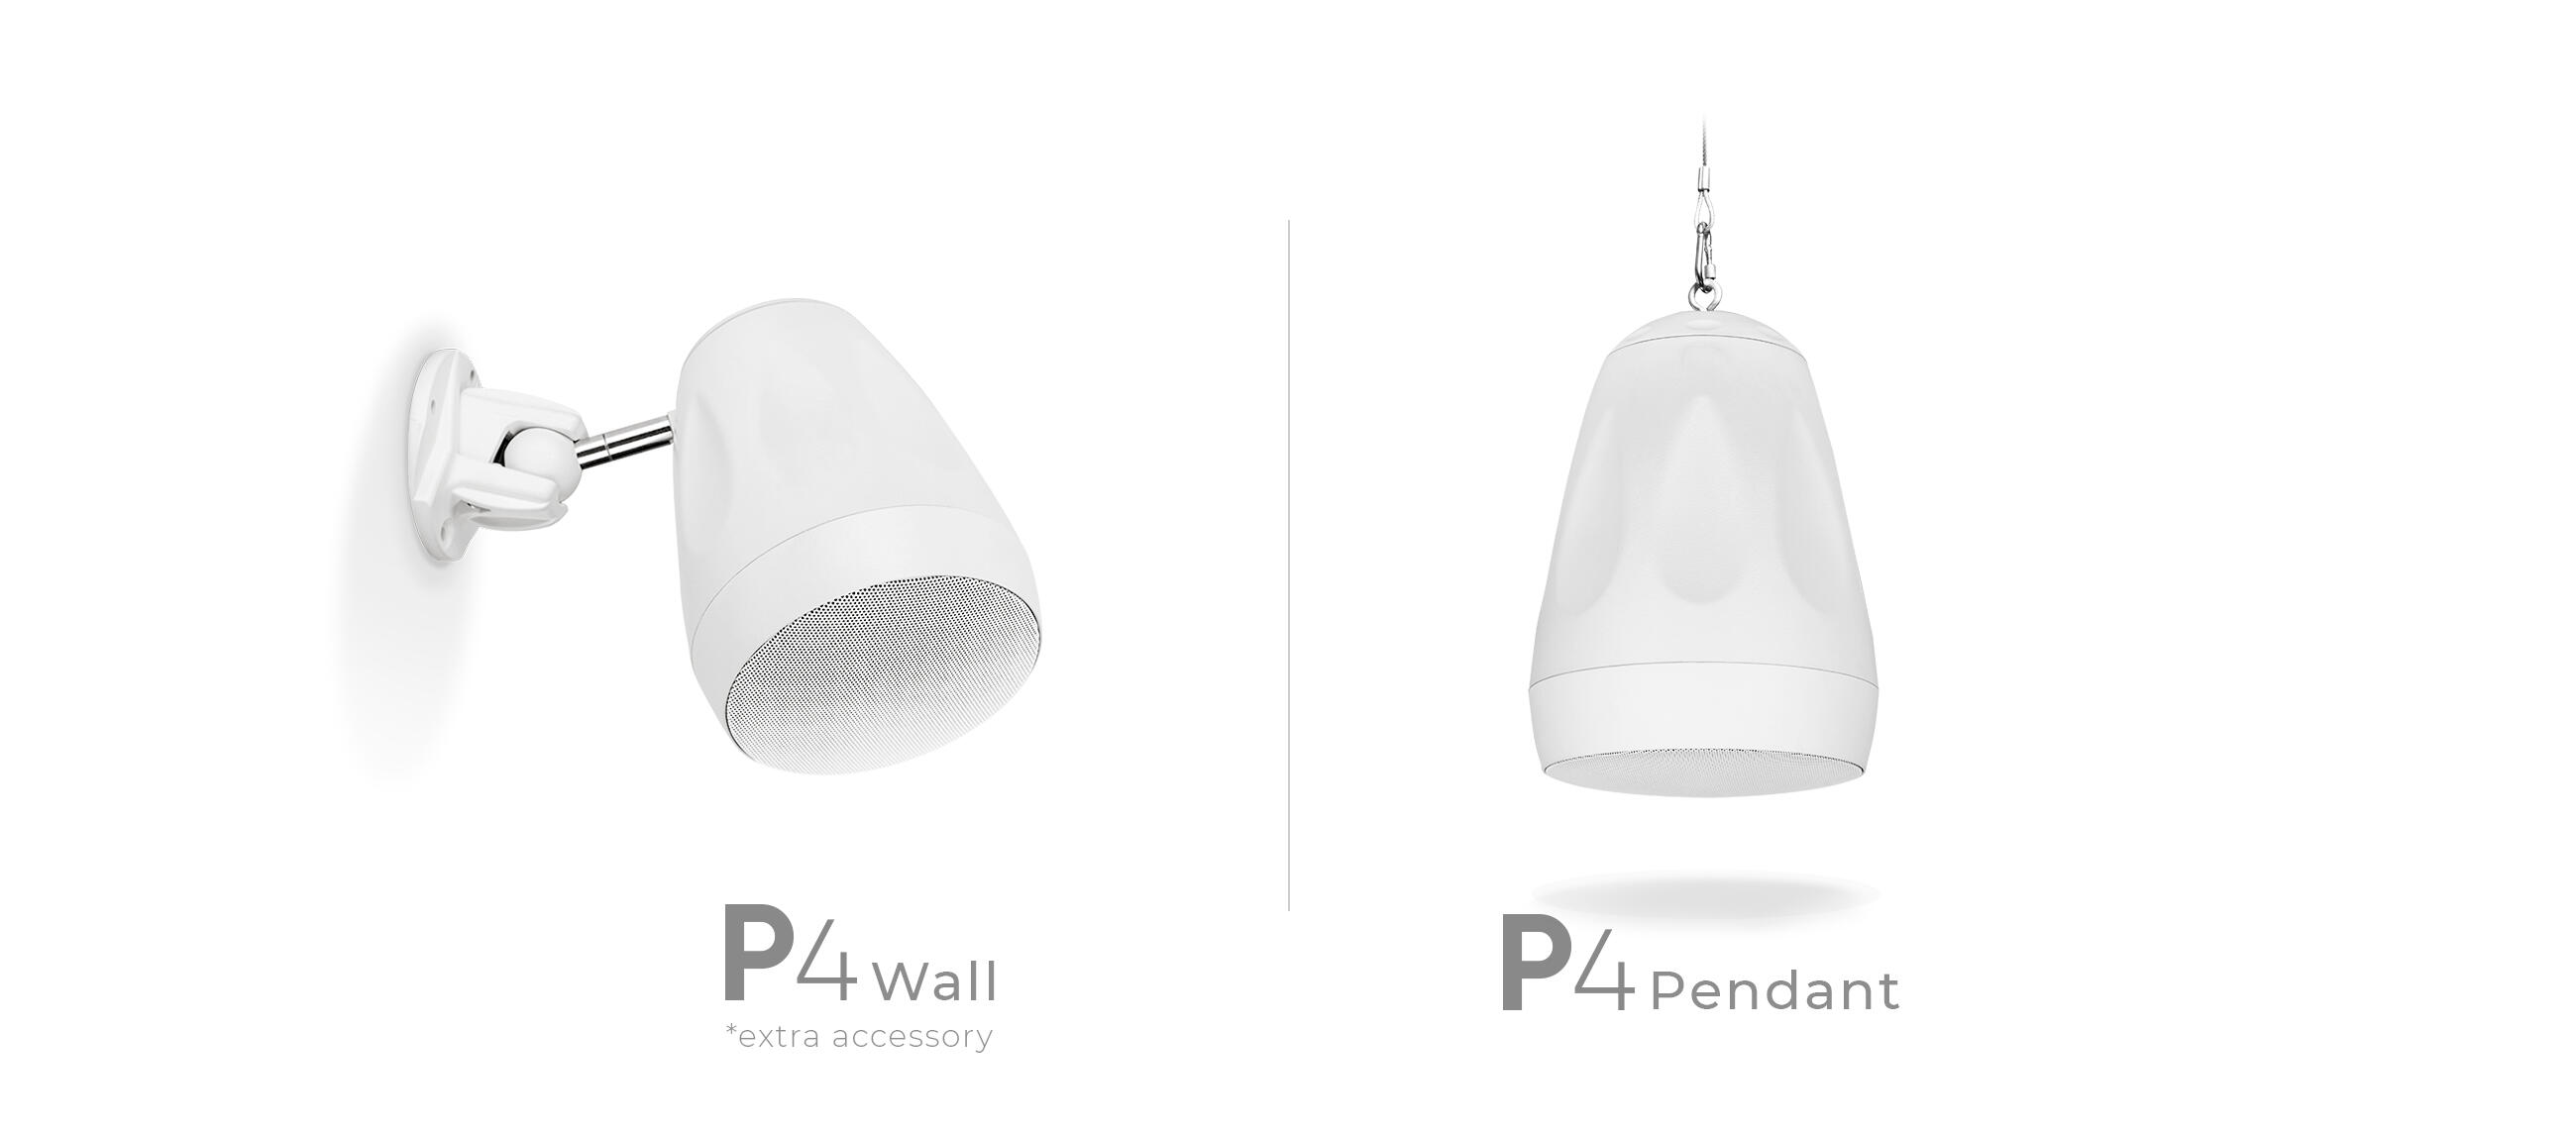 NEXT-Audiocom-P4-White-Wall-positions